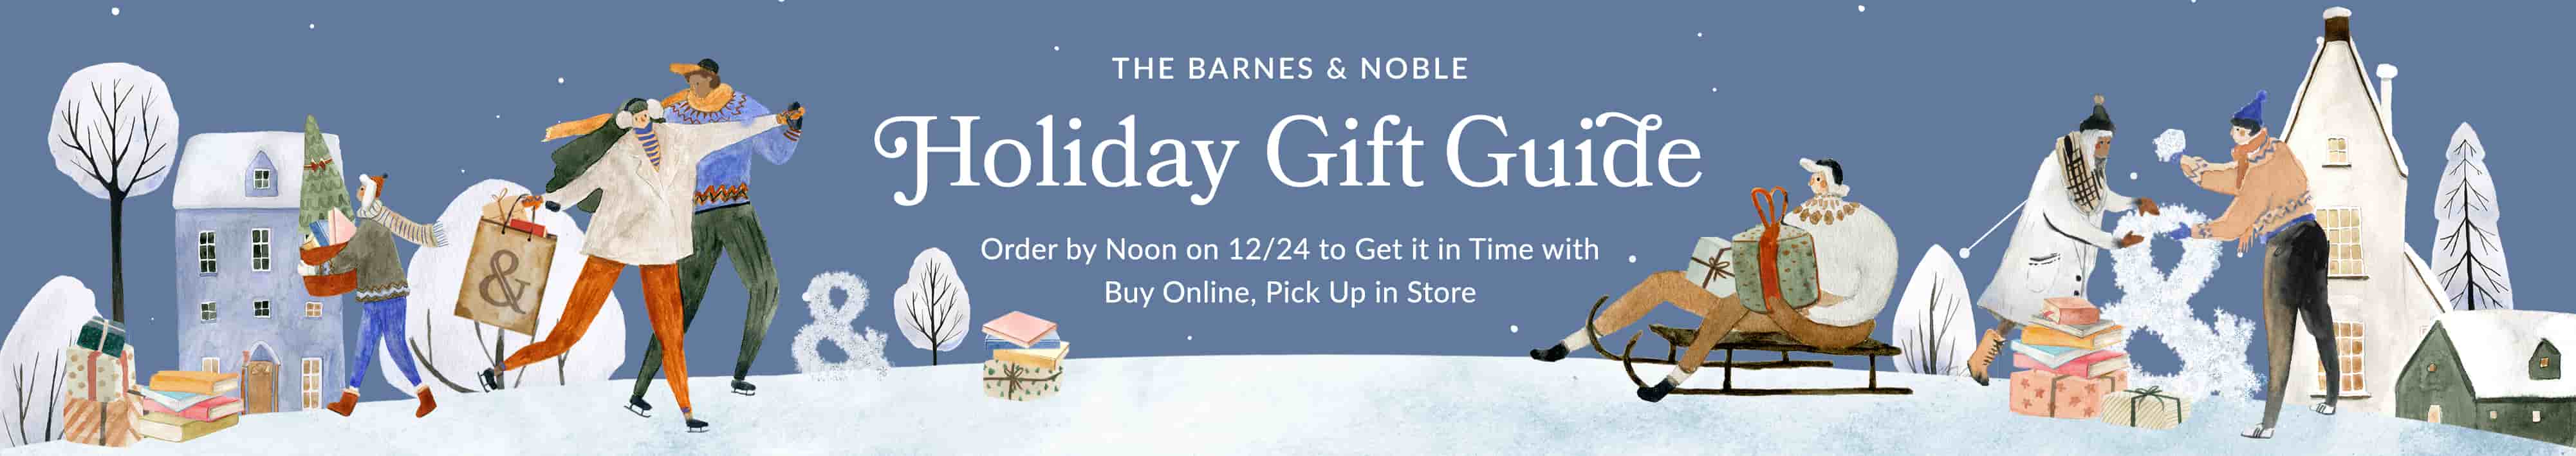 Order by 12/16 to Ship It & Gift it Just In Time! The Barnes & Noble Holiday Gift Guide! Find the perfect gift for everyone on your list